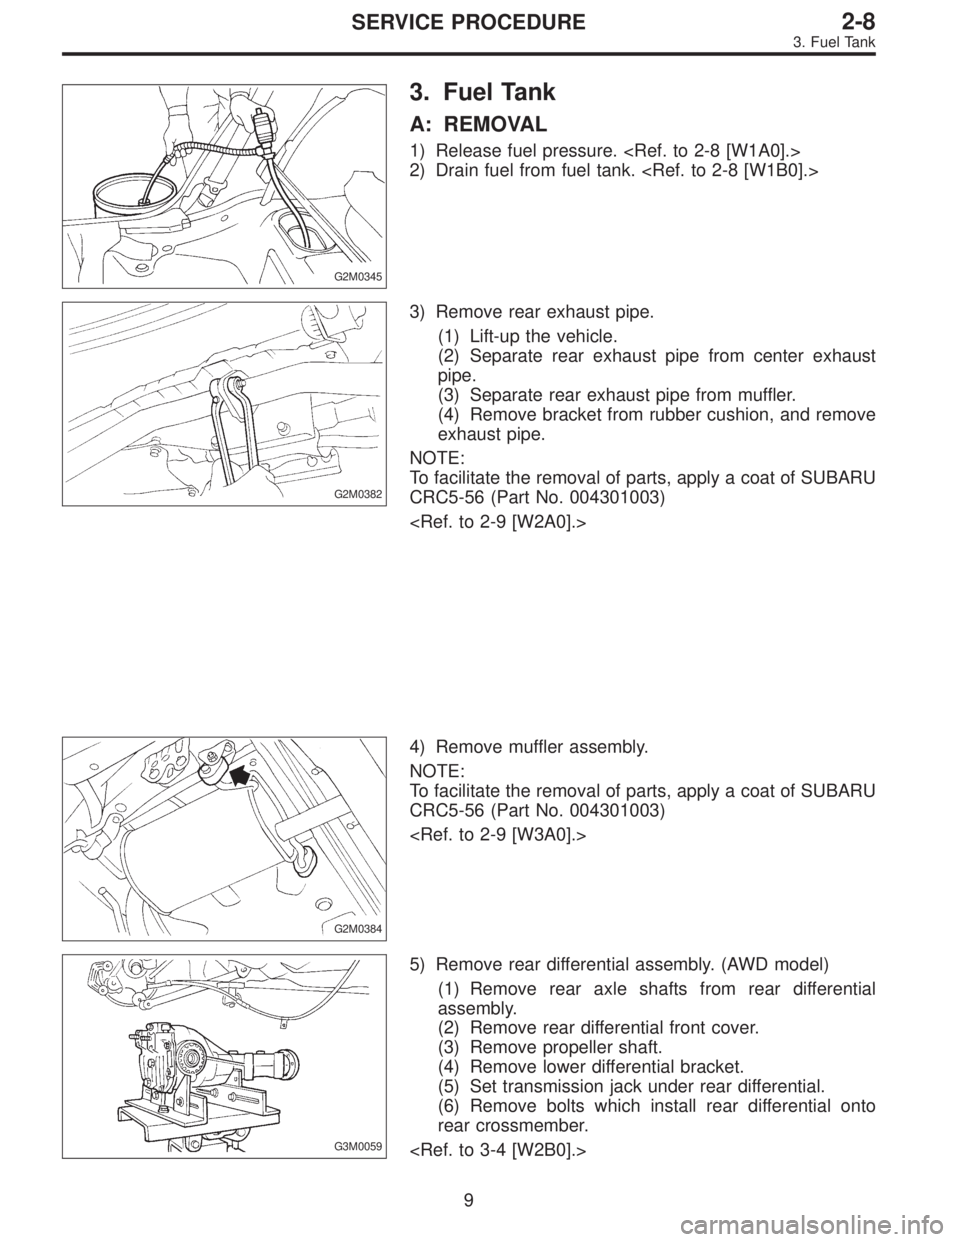 SUBARU LEGACY 1995  Service Repair Manual G2M0345
3. Fuel Tank
A: REMOVAL
1) Release fuel pressure. <Ref. to 2-8 [W1A0].>
2) Drain fuel from fuel tank. <Ref. to 2-8 [W1B0].>
G2M0382
3) Remove rear exhaust pipe.
(1) Lift-up the vehicle.
(2) Se